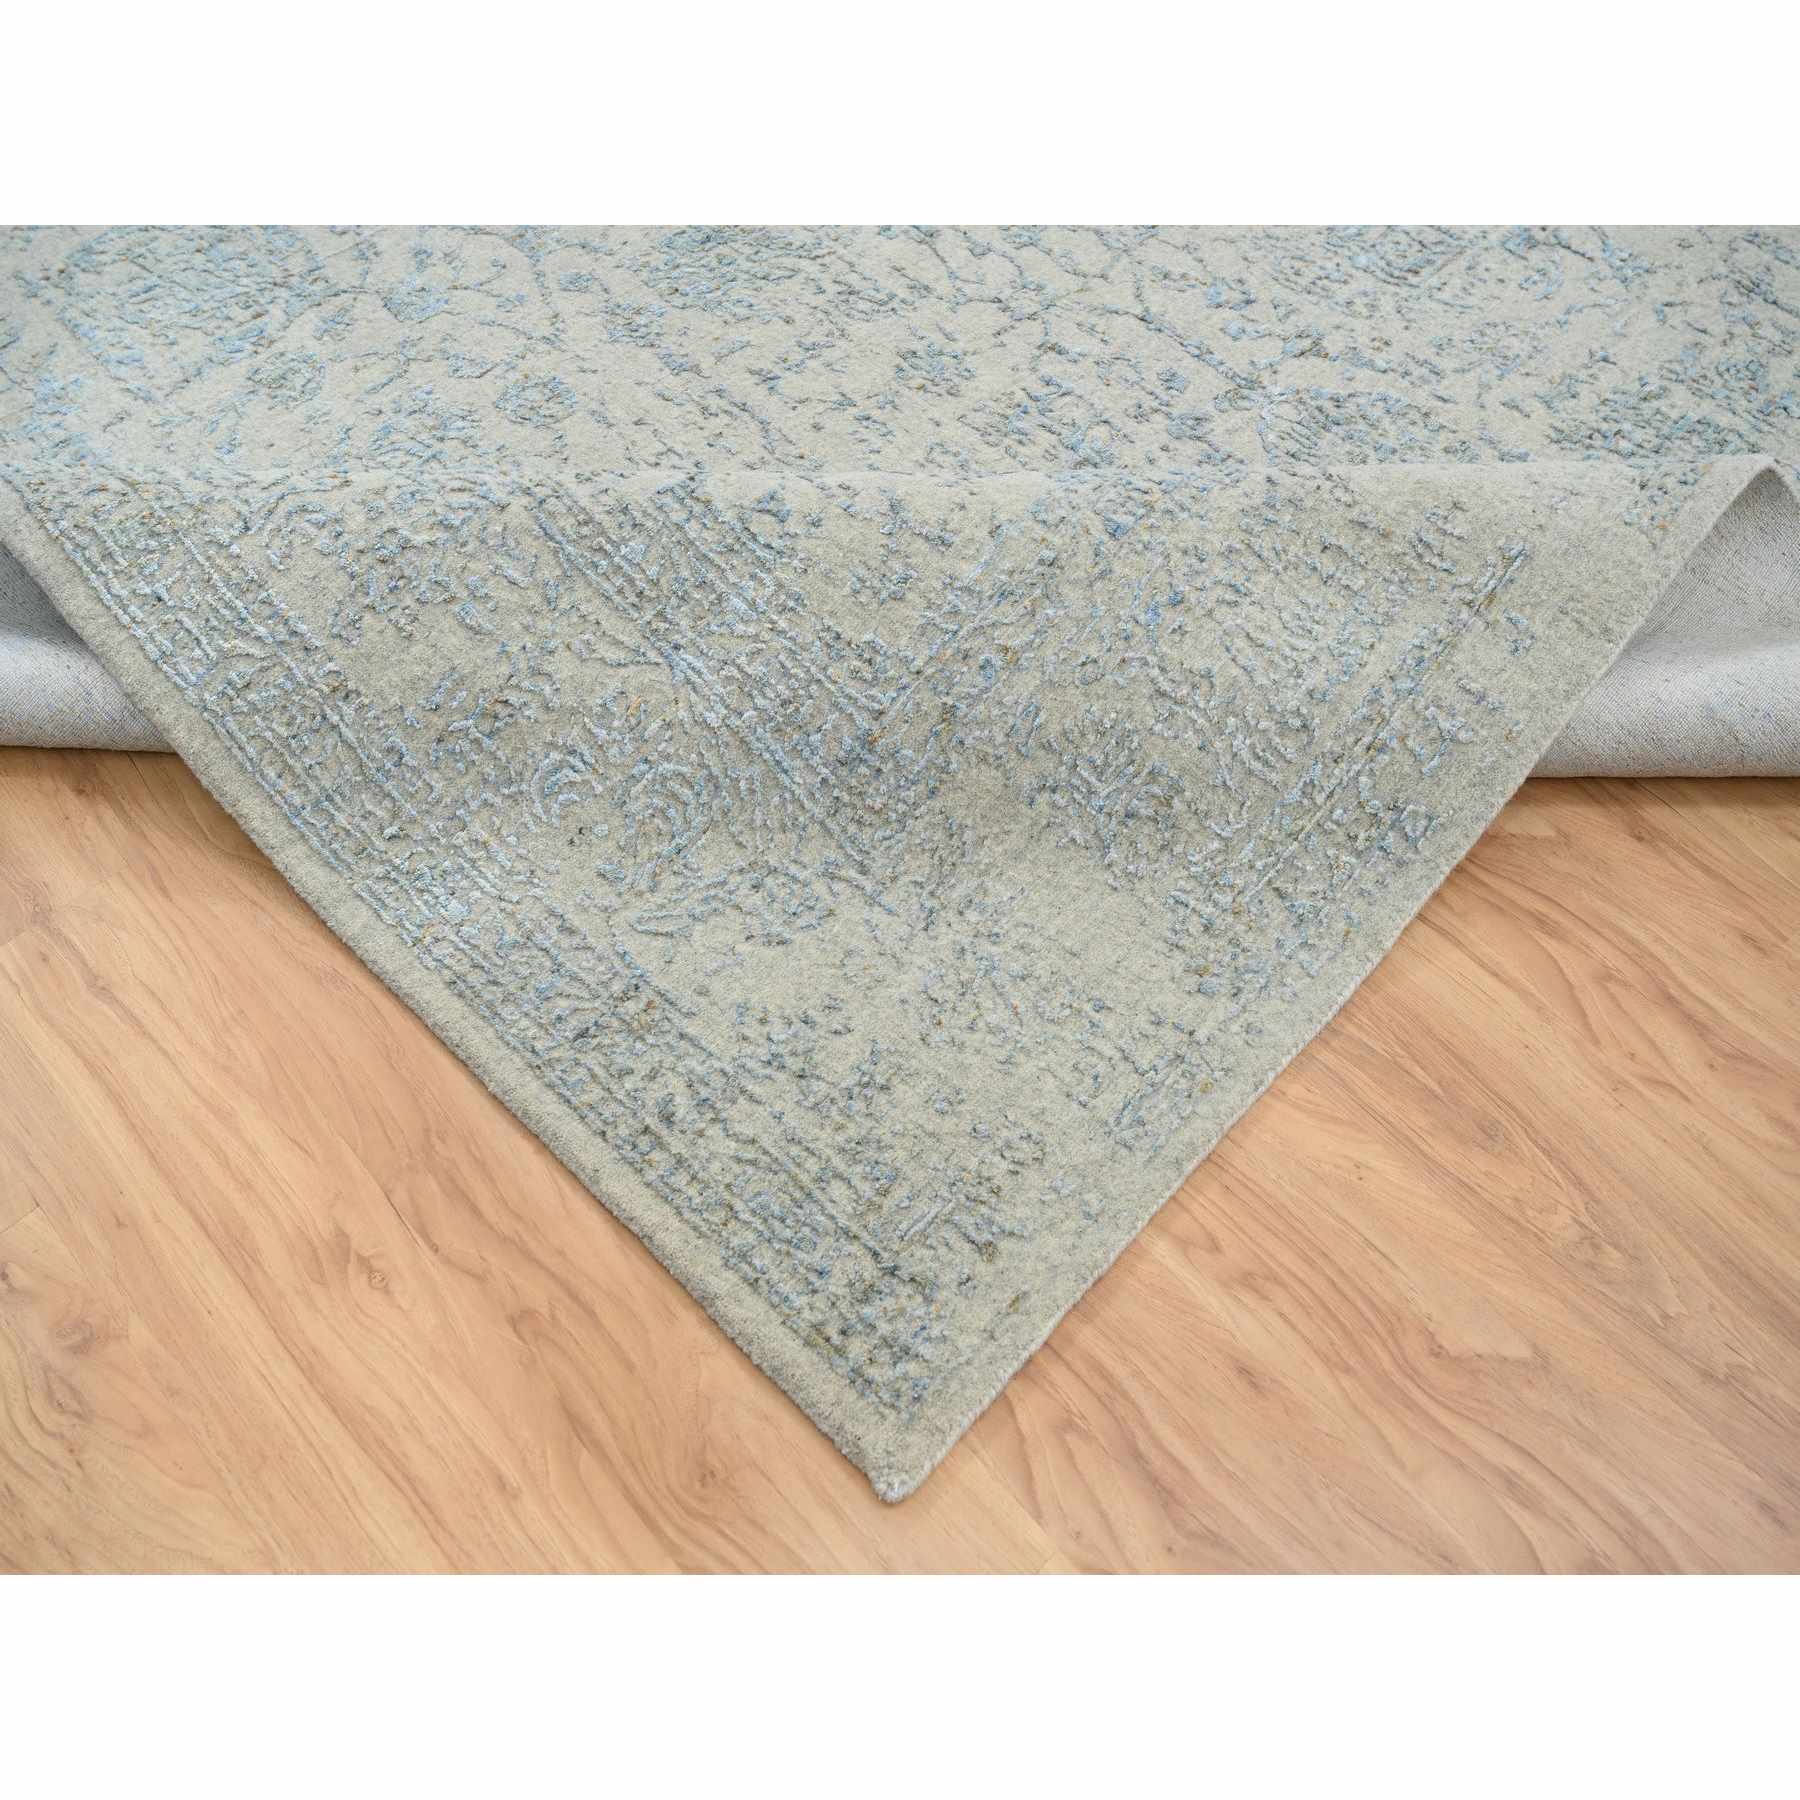 Transitional-Hand-Loomed-Rug-322715